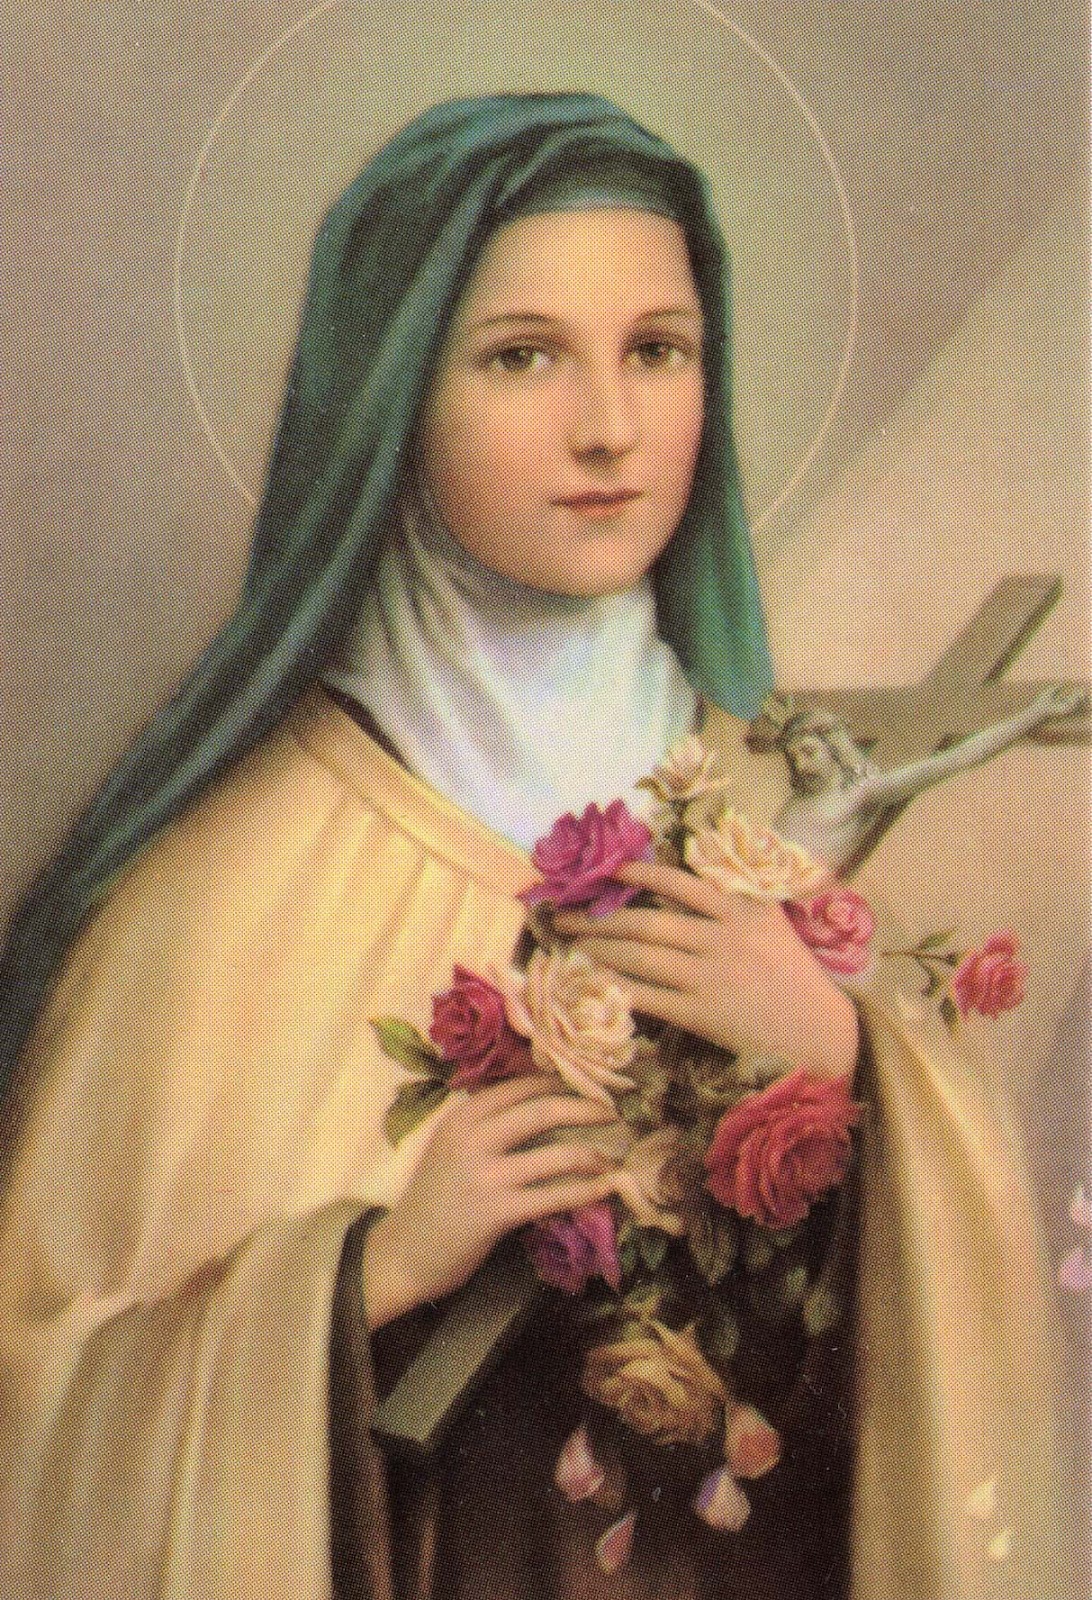 Favorite saint - St. Therese